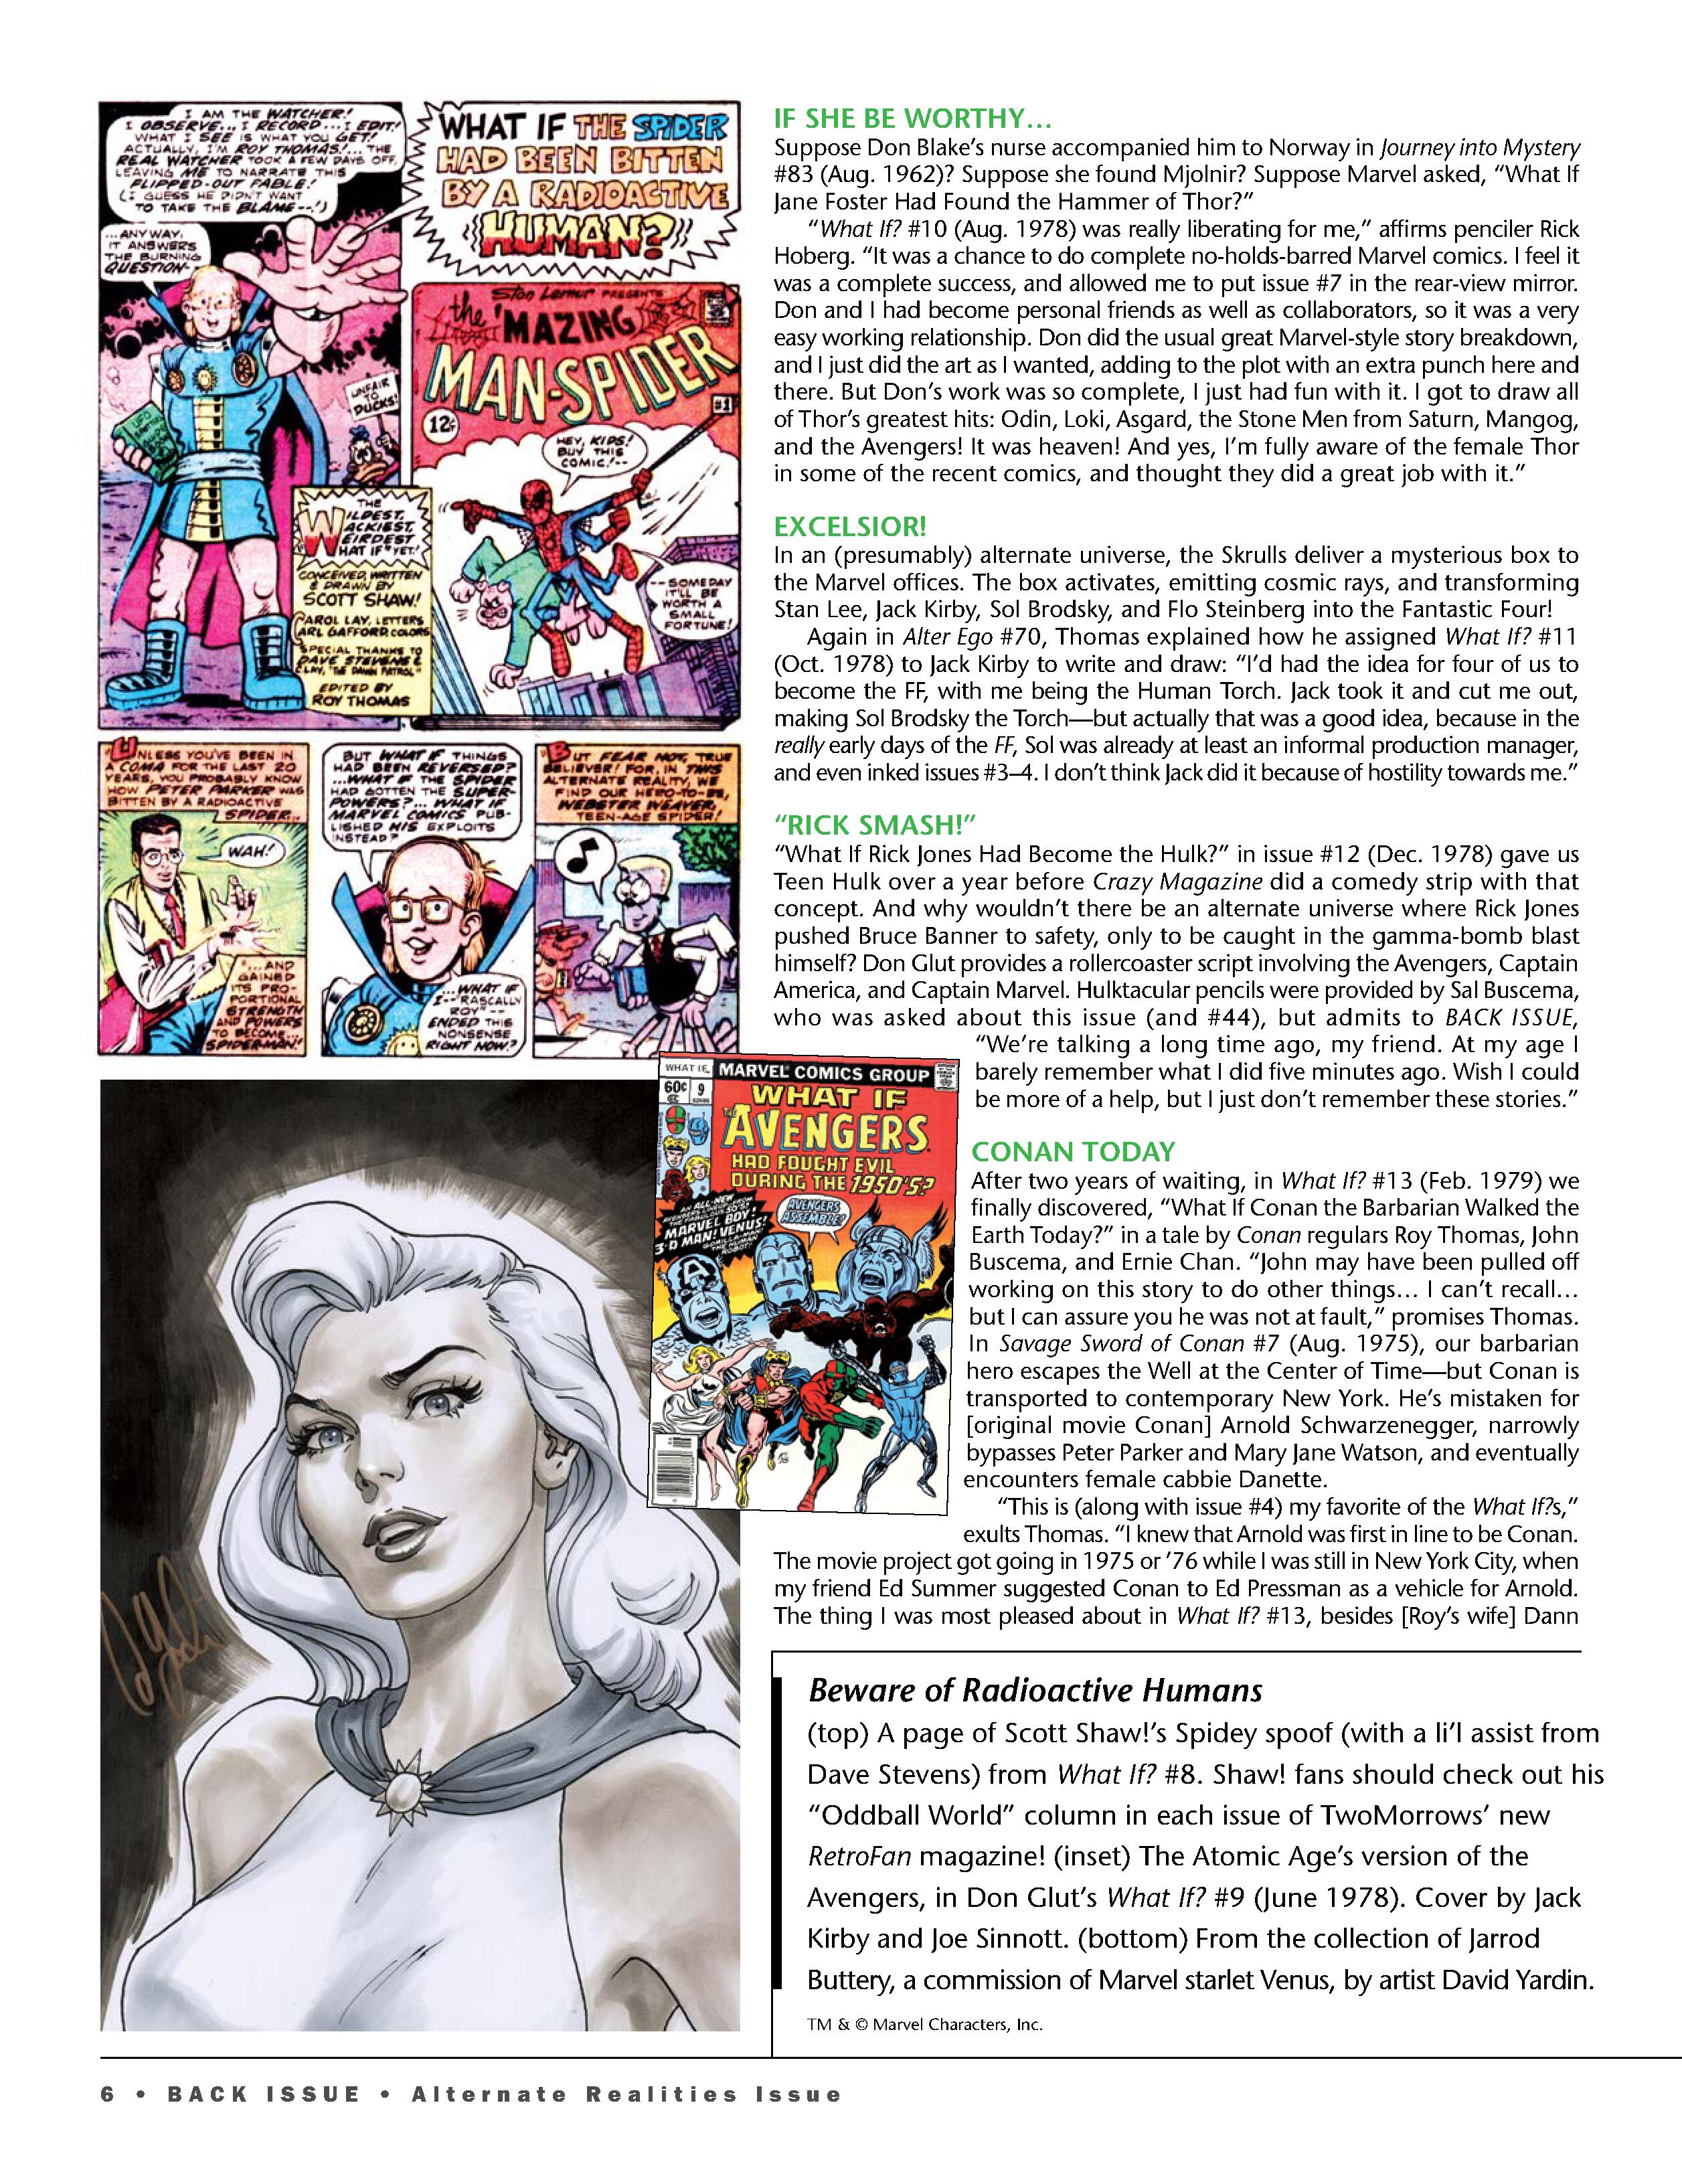 Read online Back Issue comic -  Issue #111 - 8